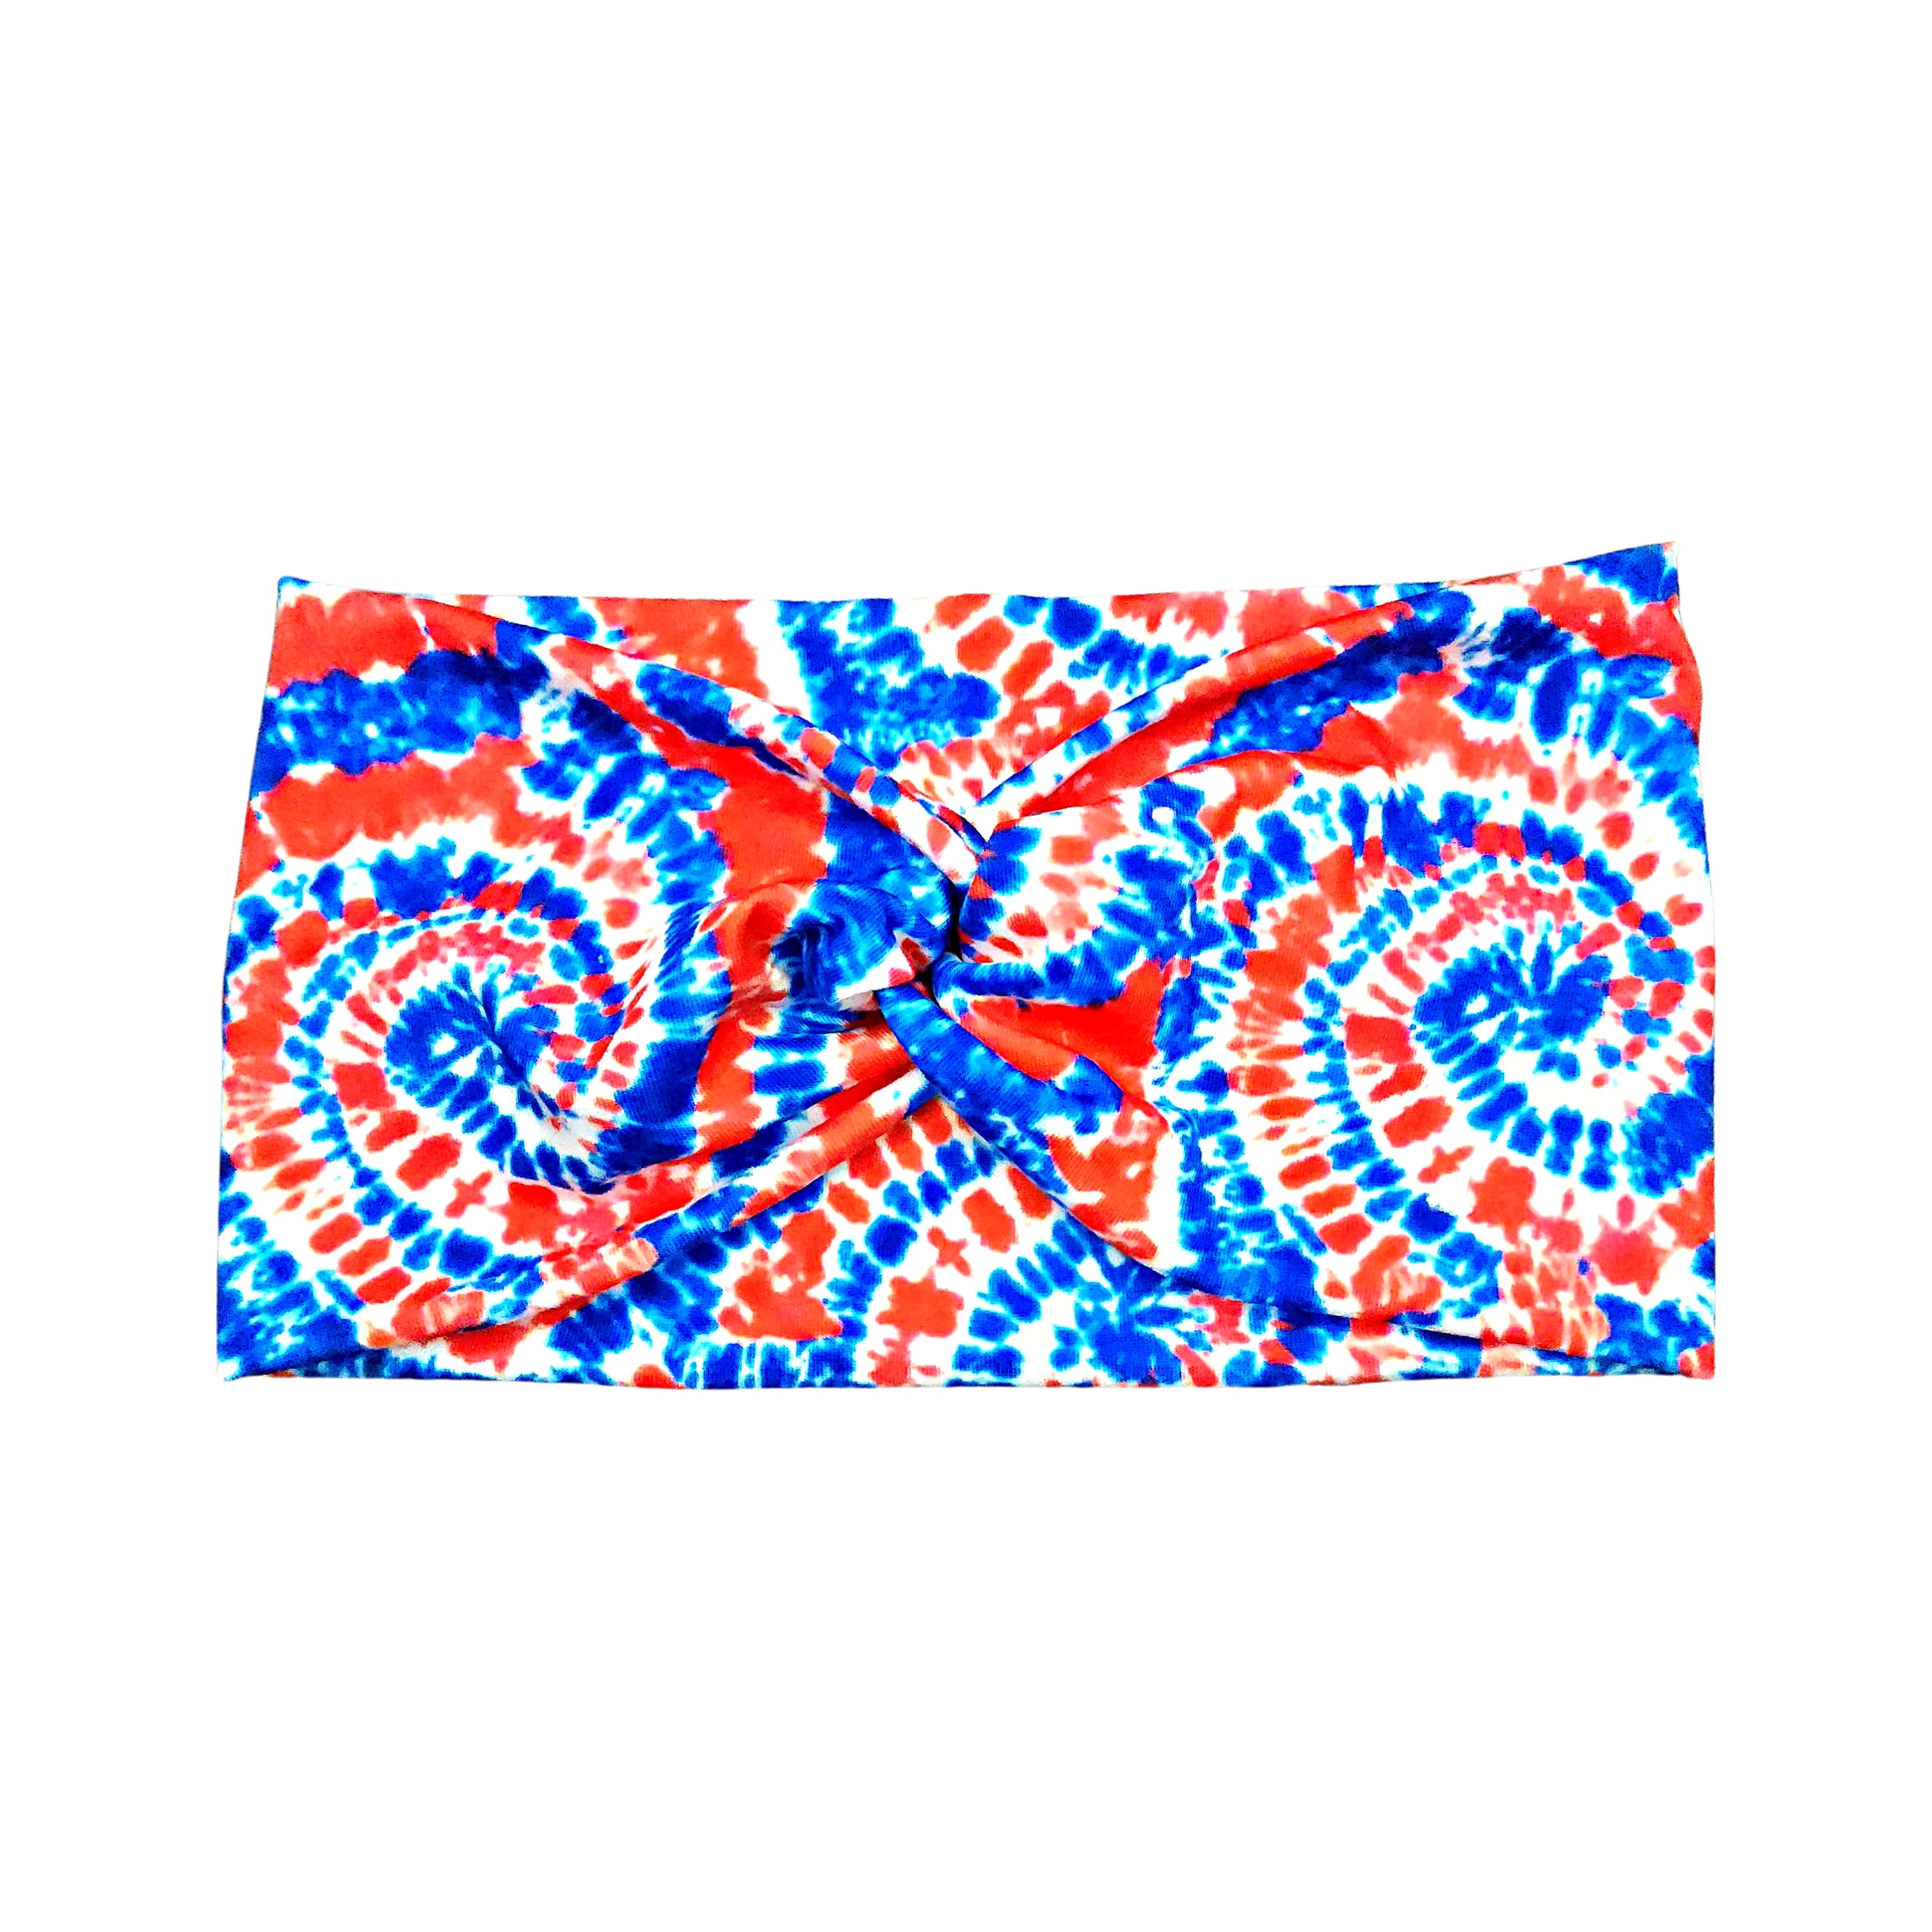 Wide Red White and Blue Tie Dye Headband for Women